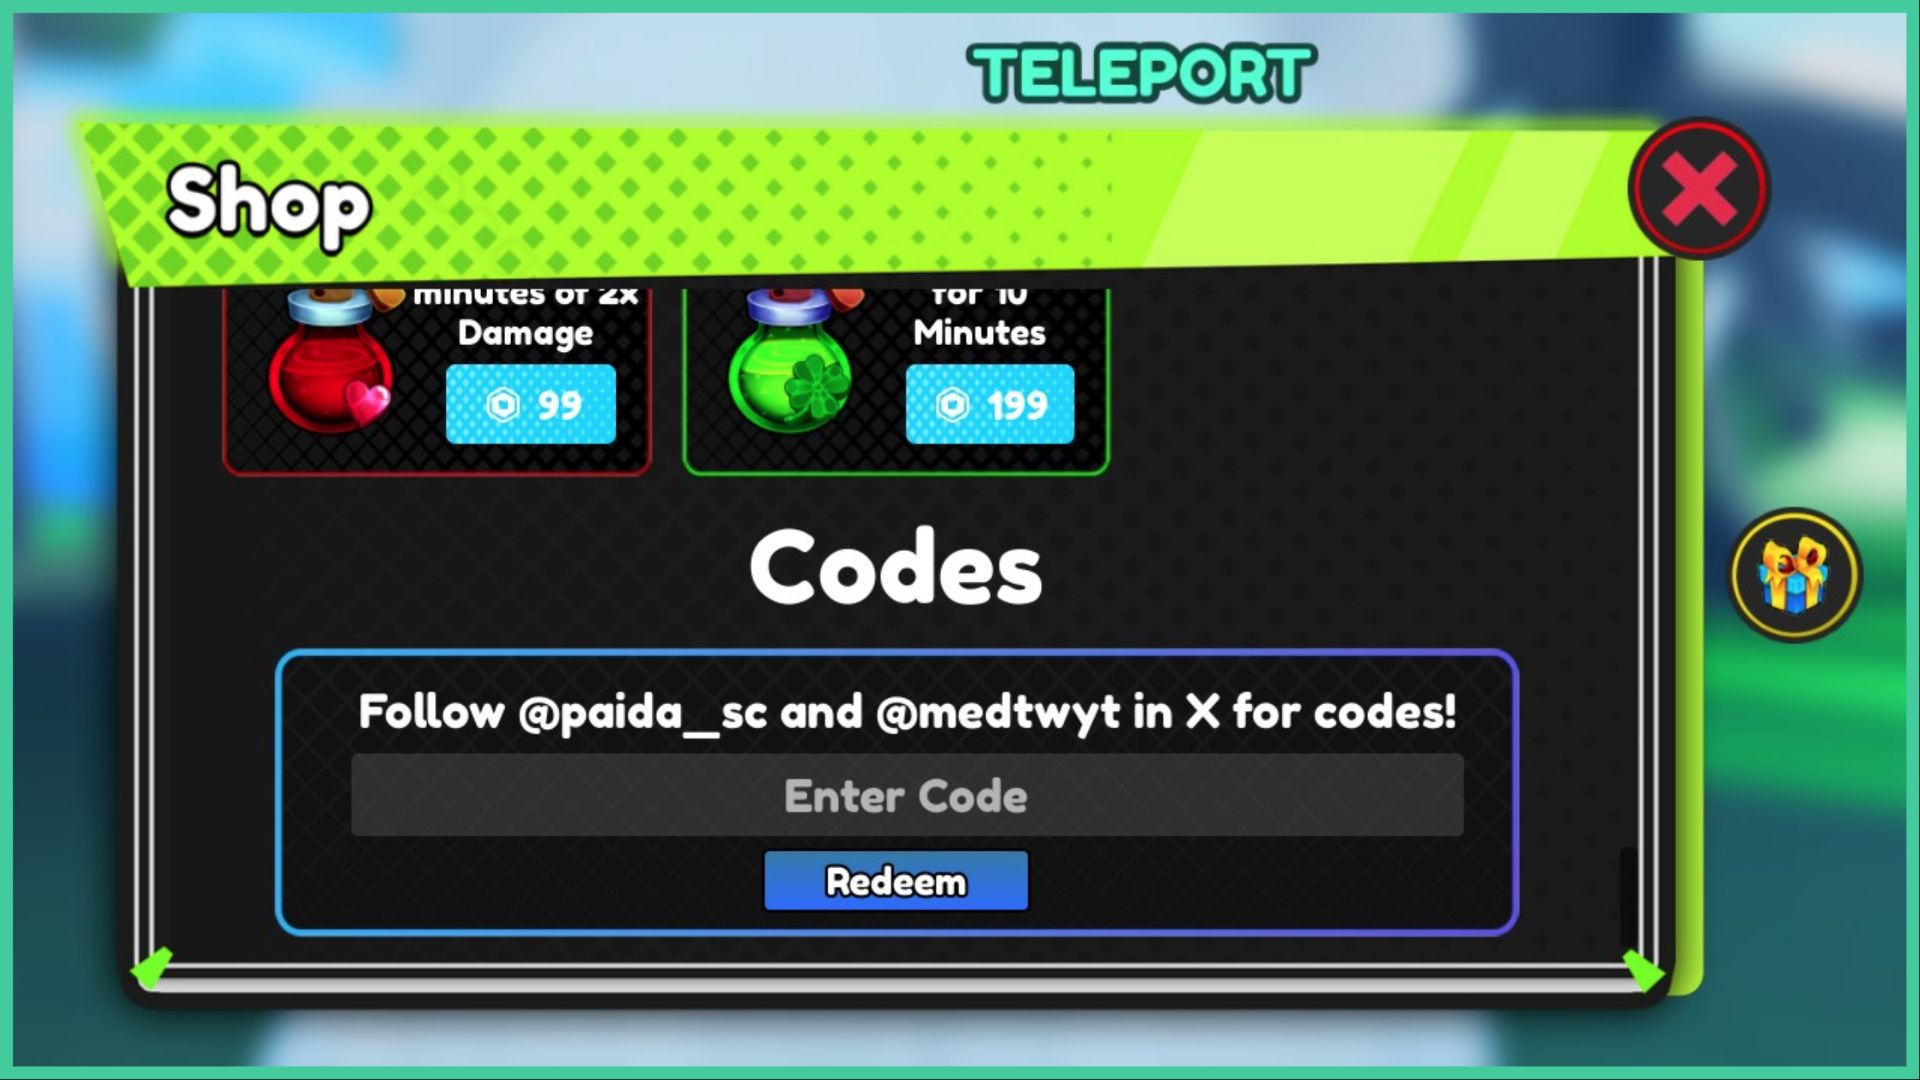 feature image for our anime fantasy simulator codes, the image features a screenshot of the shop window that pops up in the game, with the codes section at the bottom of the window with a text box and a button to click to redeem codes